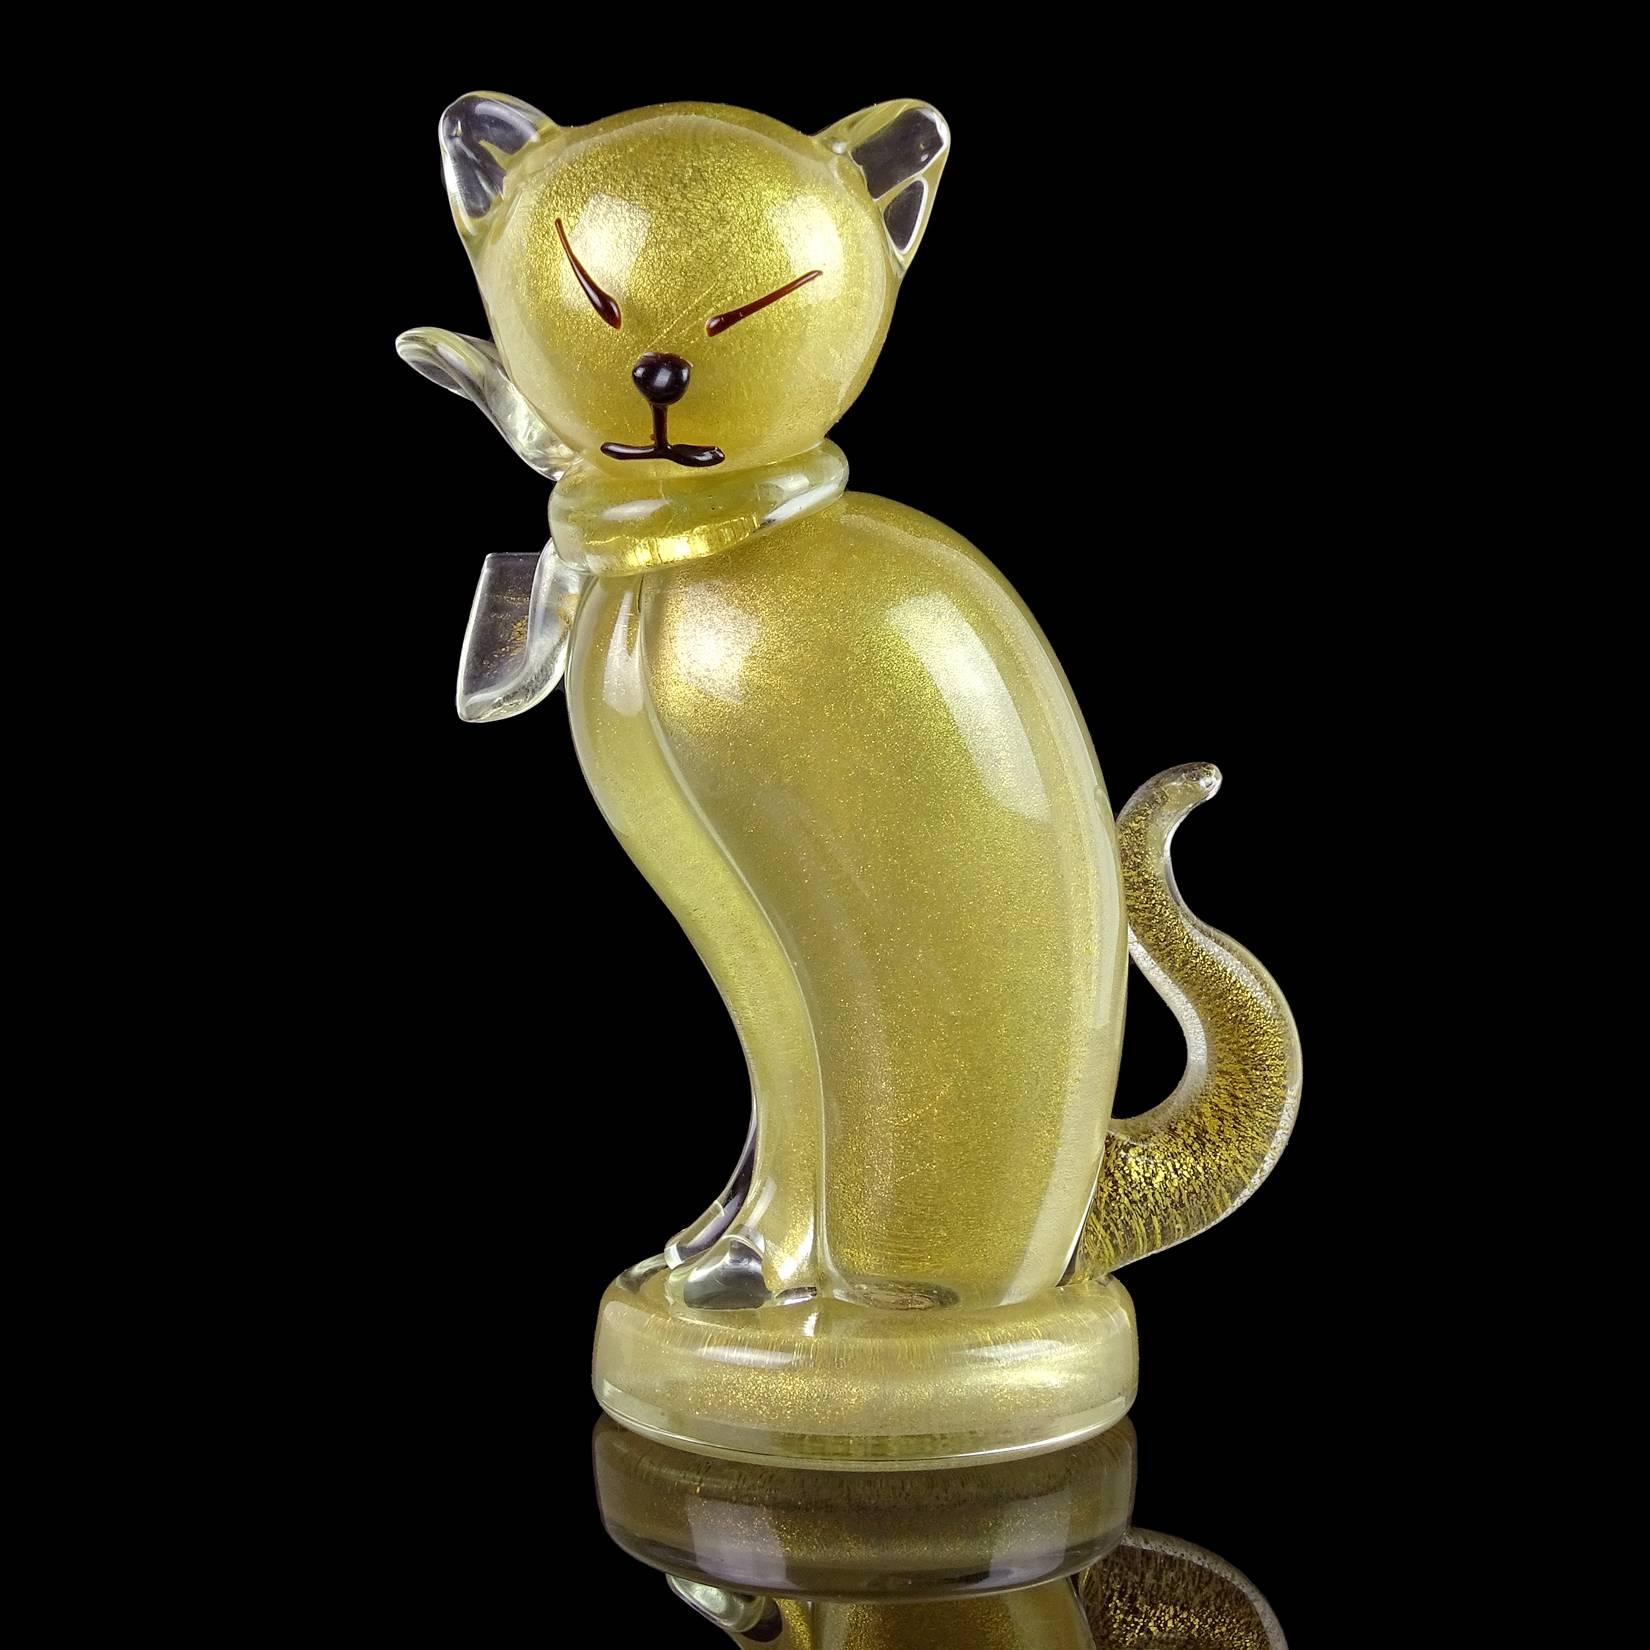 Beautiful vintage Murano hand blown clear and gold flecks Italian art glass kitty cat sculpture on round base. Documented to designer Alfredo Barbini. The piece is profusely covered in gold leaf, with bow around its neck. Stands on a round disk, and